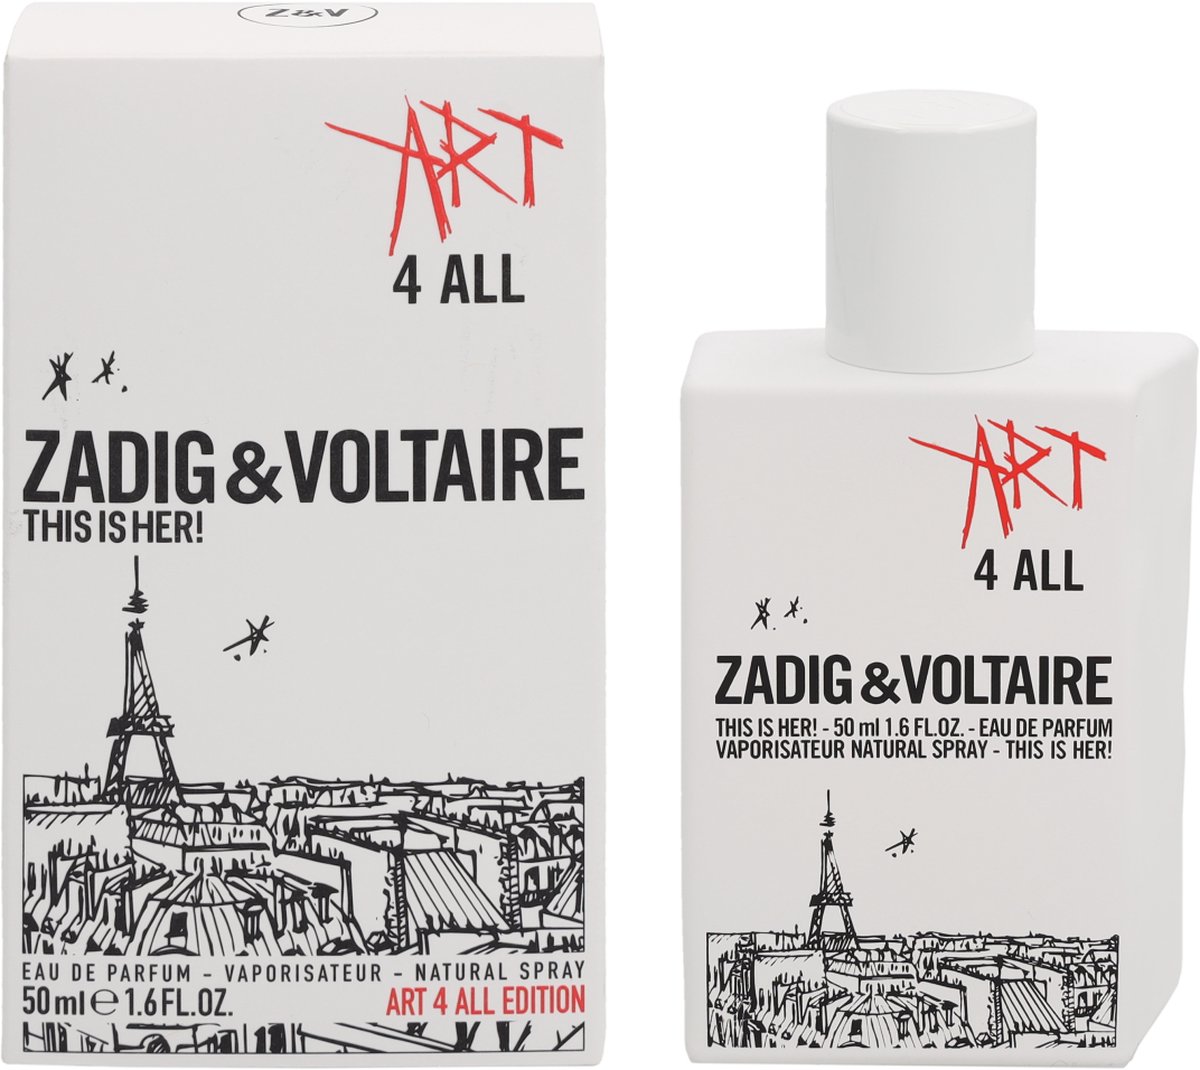 Zadig & Voltaire This is Her! Art 4 All Limited Edition Eau de toilette - 50 ml